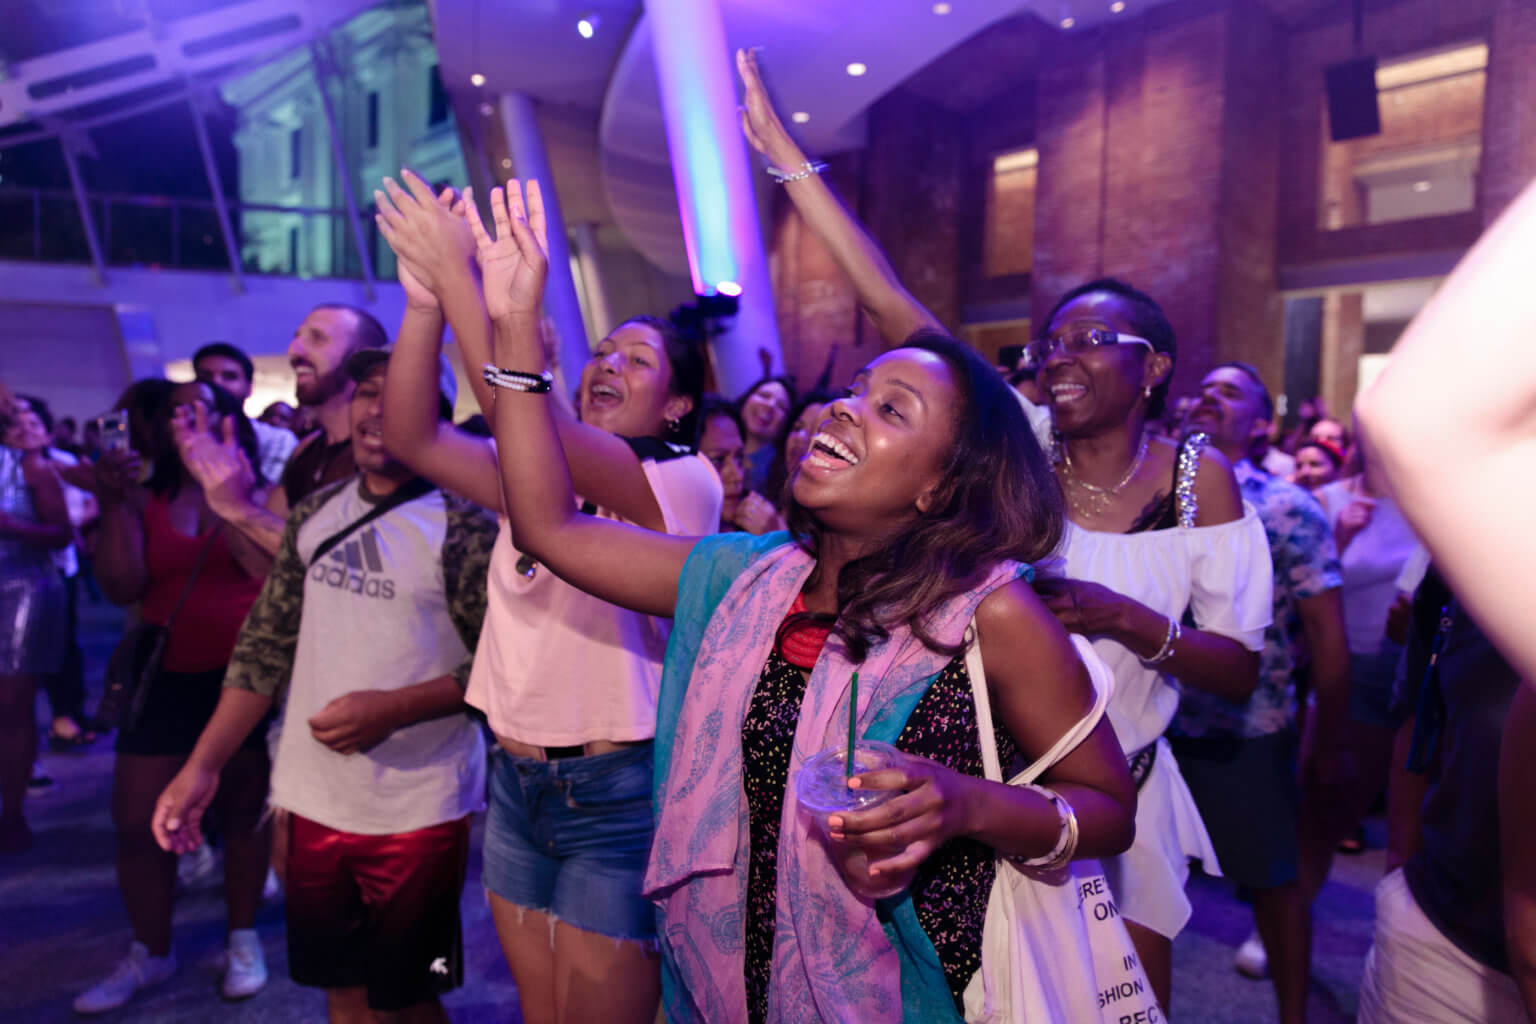 Brooklyn Museum’s ‘First Saturdays’ are back with a bang this weekend